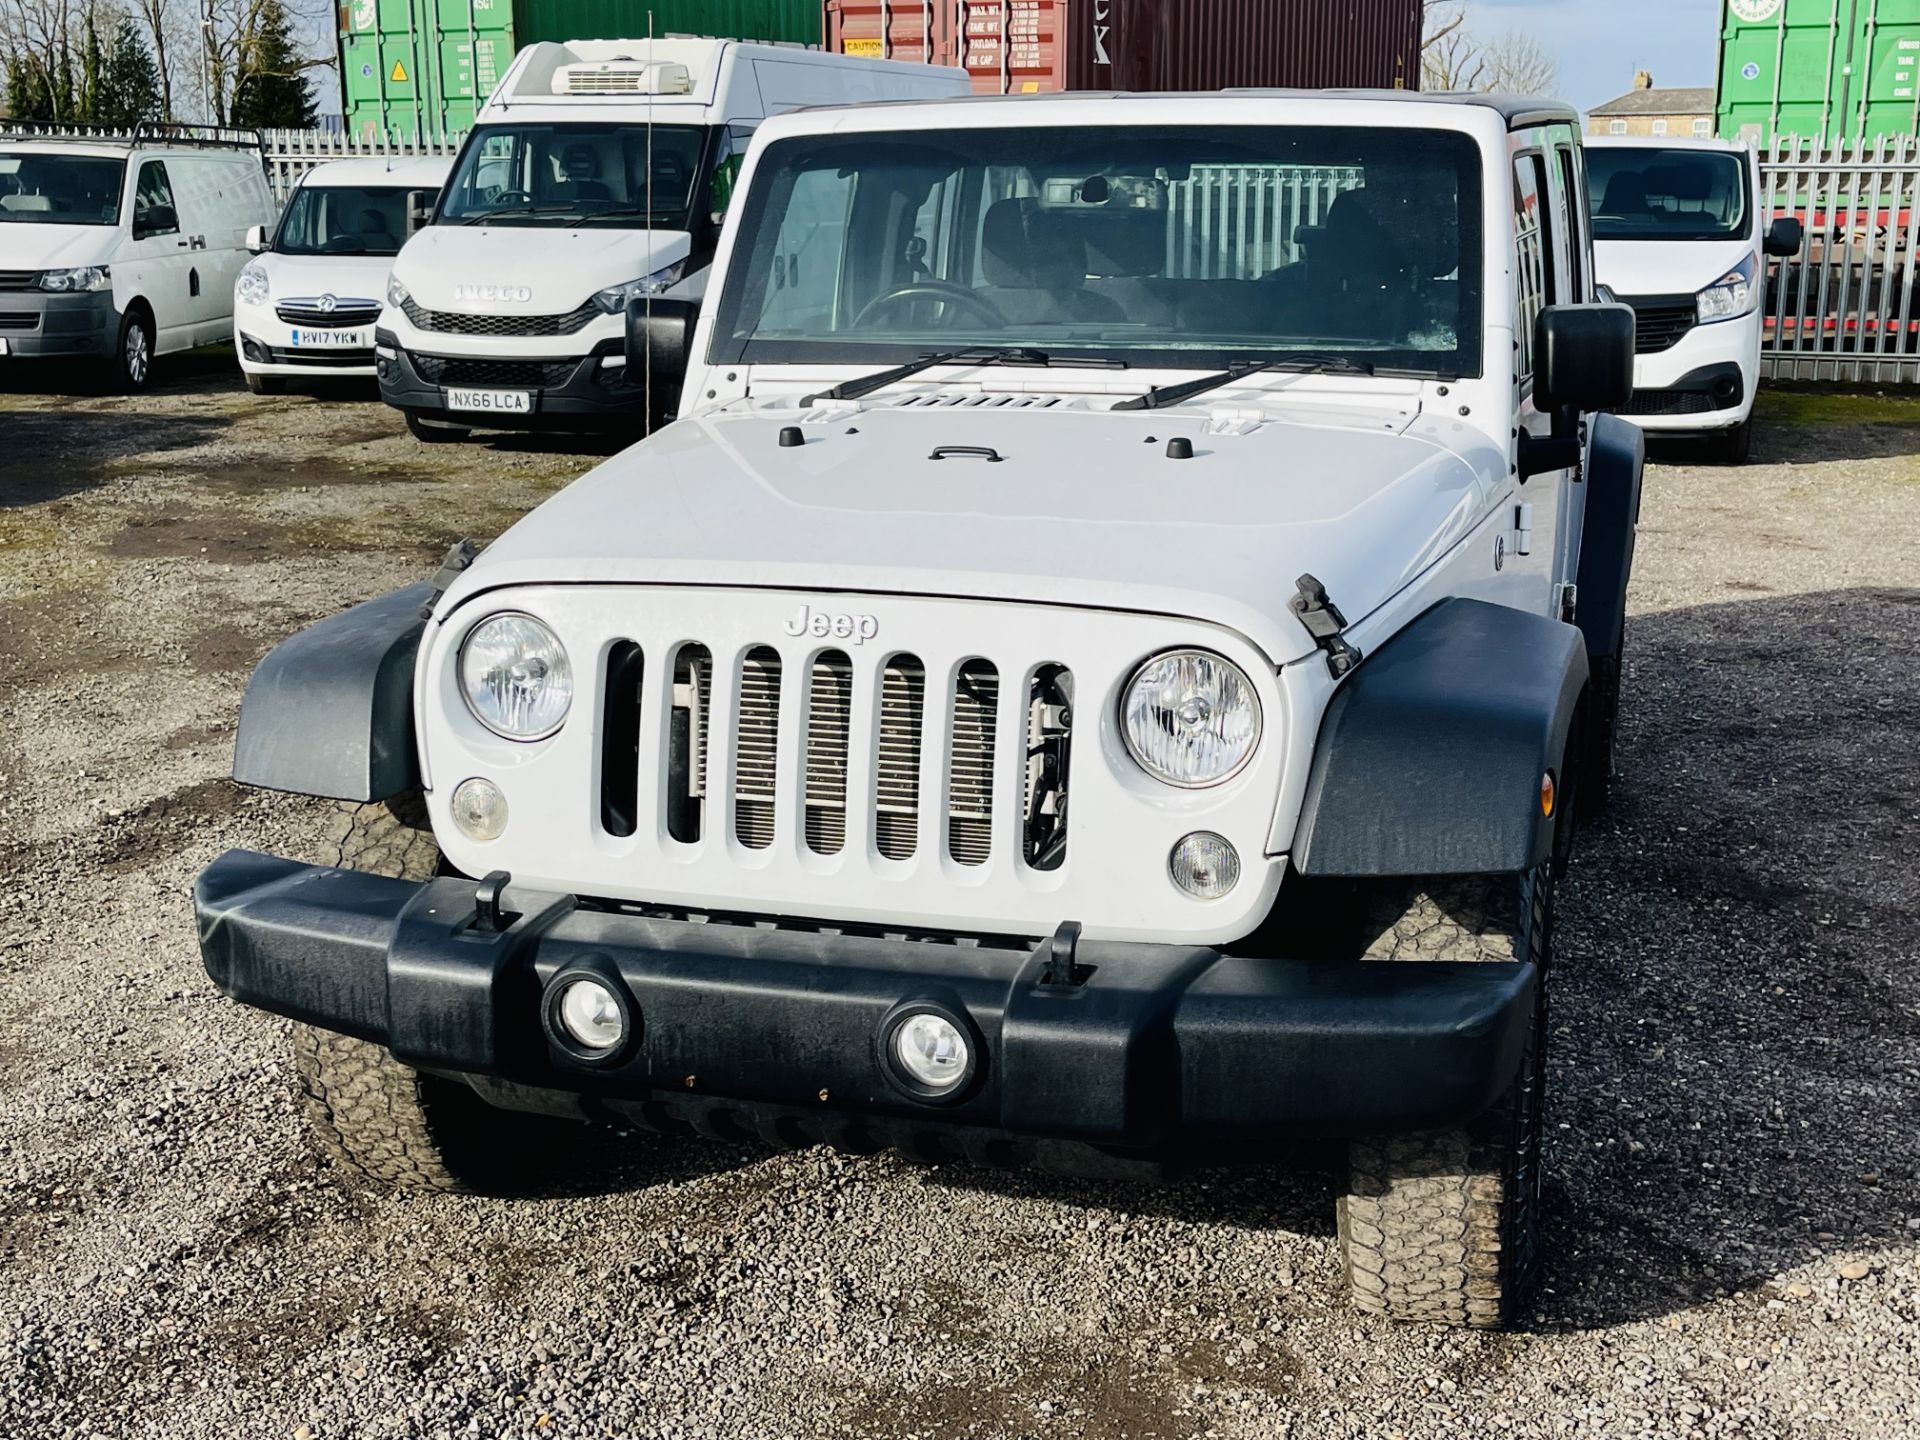 **ON SALE** Jeep Wrangler 3.6L V6 Unlimited Sport 4WD Auto Convertible Hardtop '2017 Year' A/C - Image 3 of 25